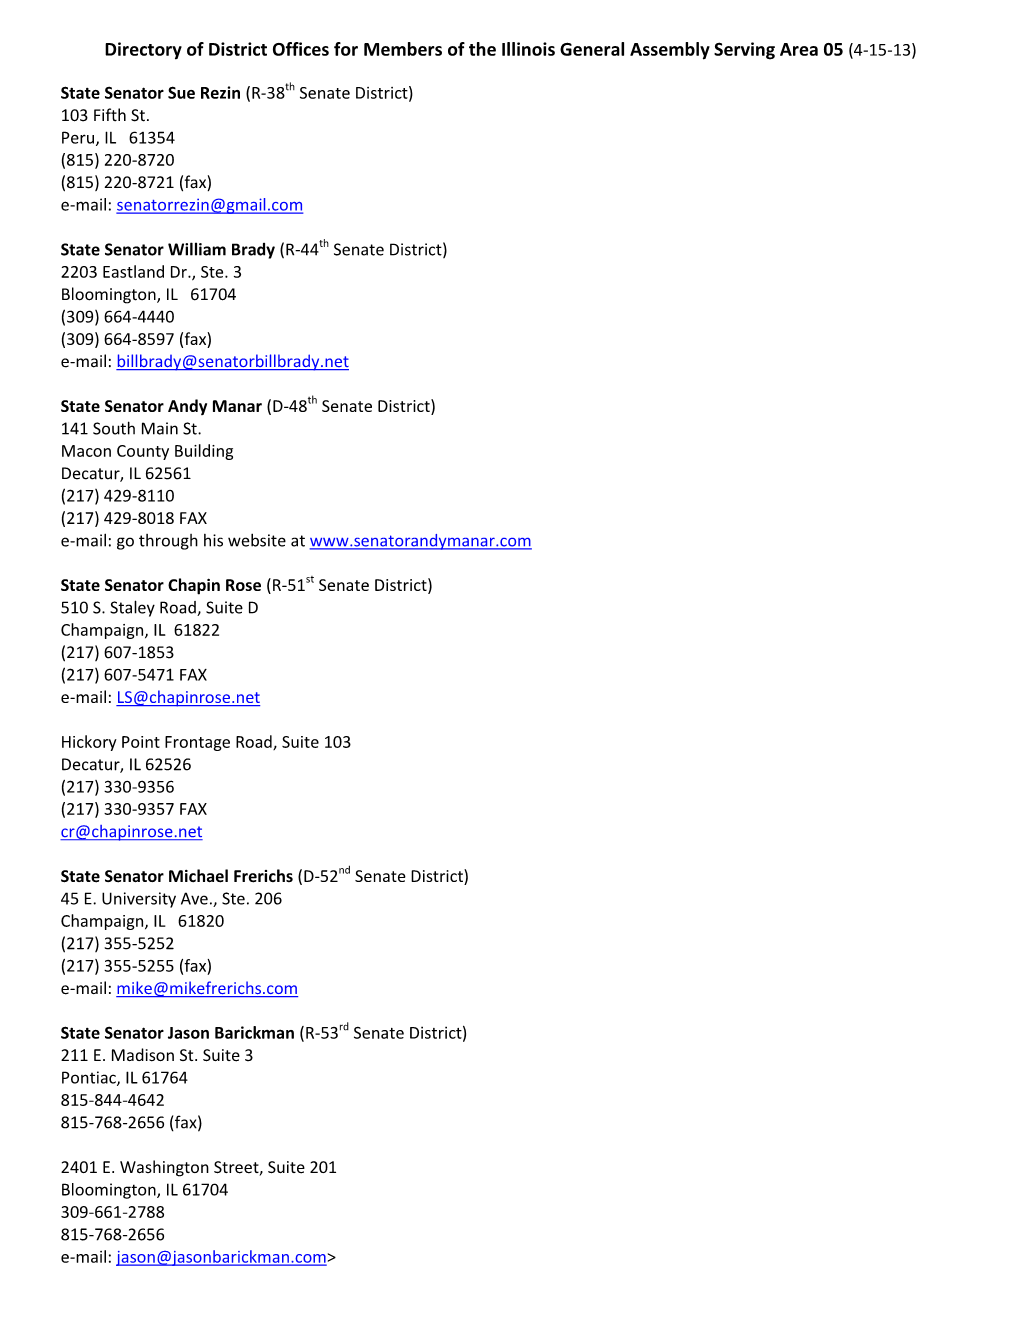 Directory of District Offices for Members of the Illinois General Assembly Serving Area 05 (4-15-13)